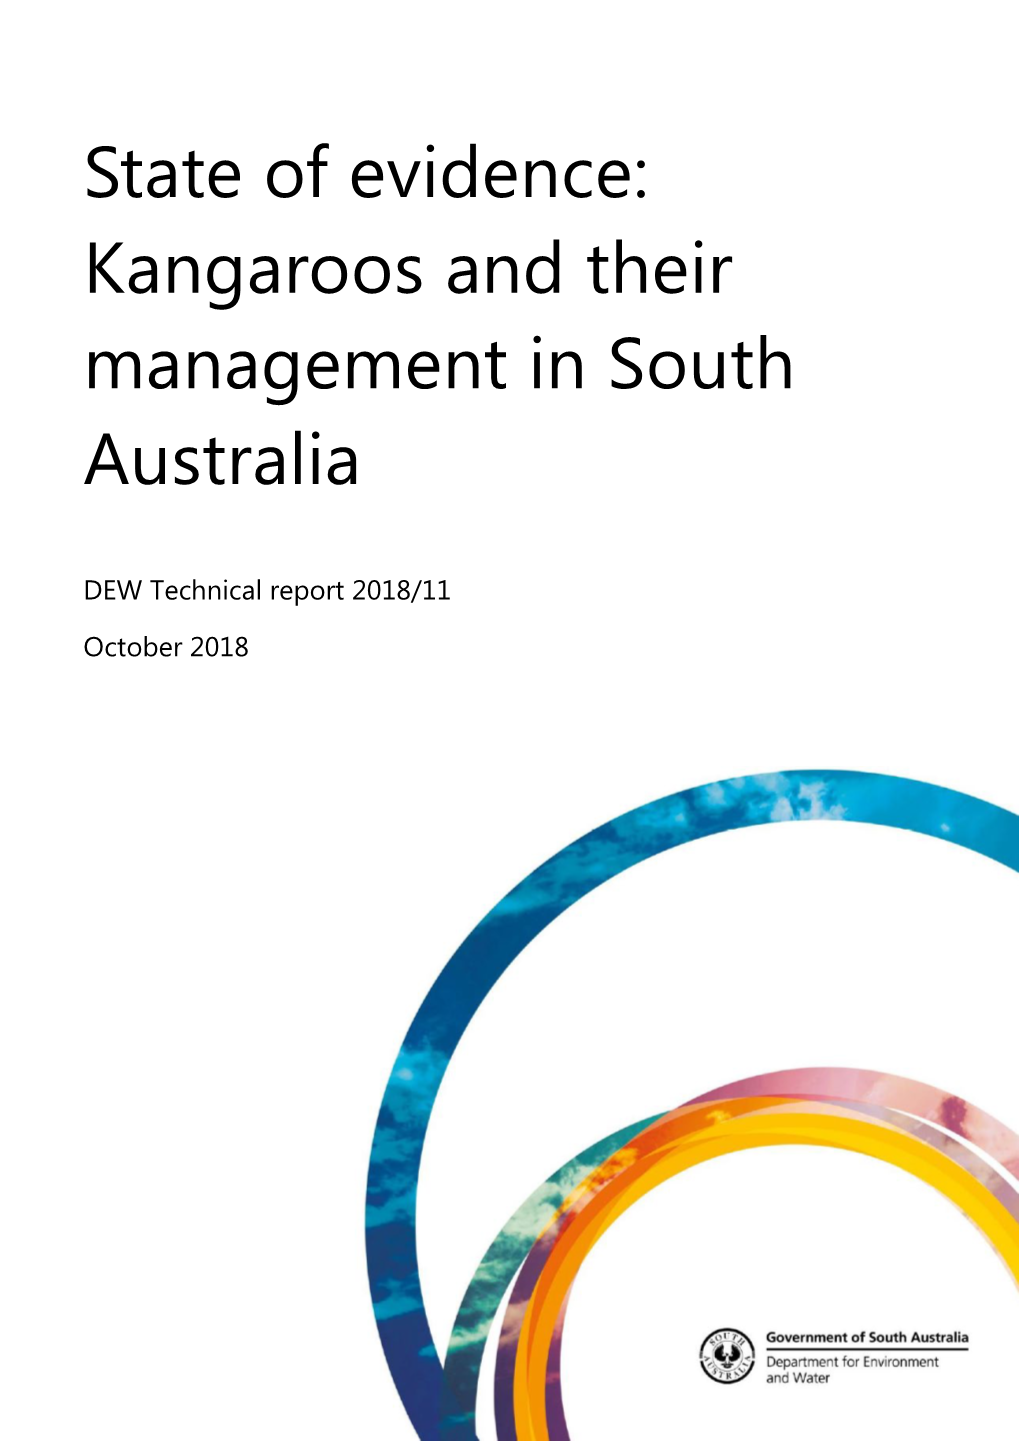 State of Evidence: Kangaroos and Their Management in South Australia